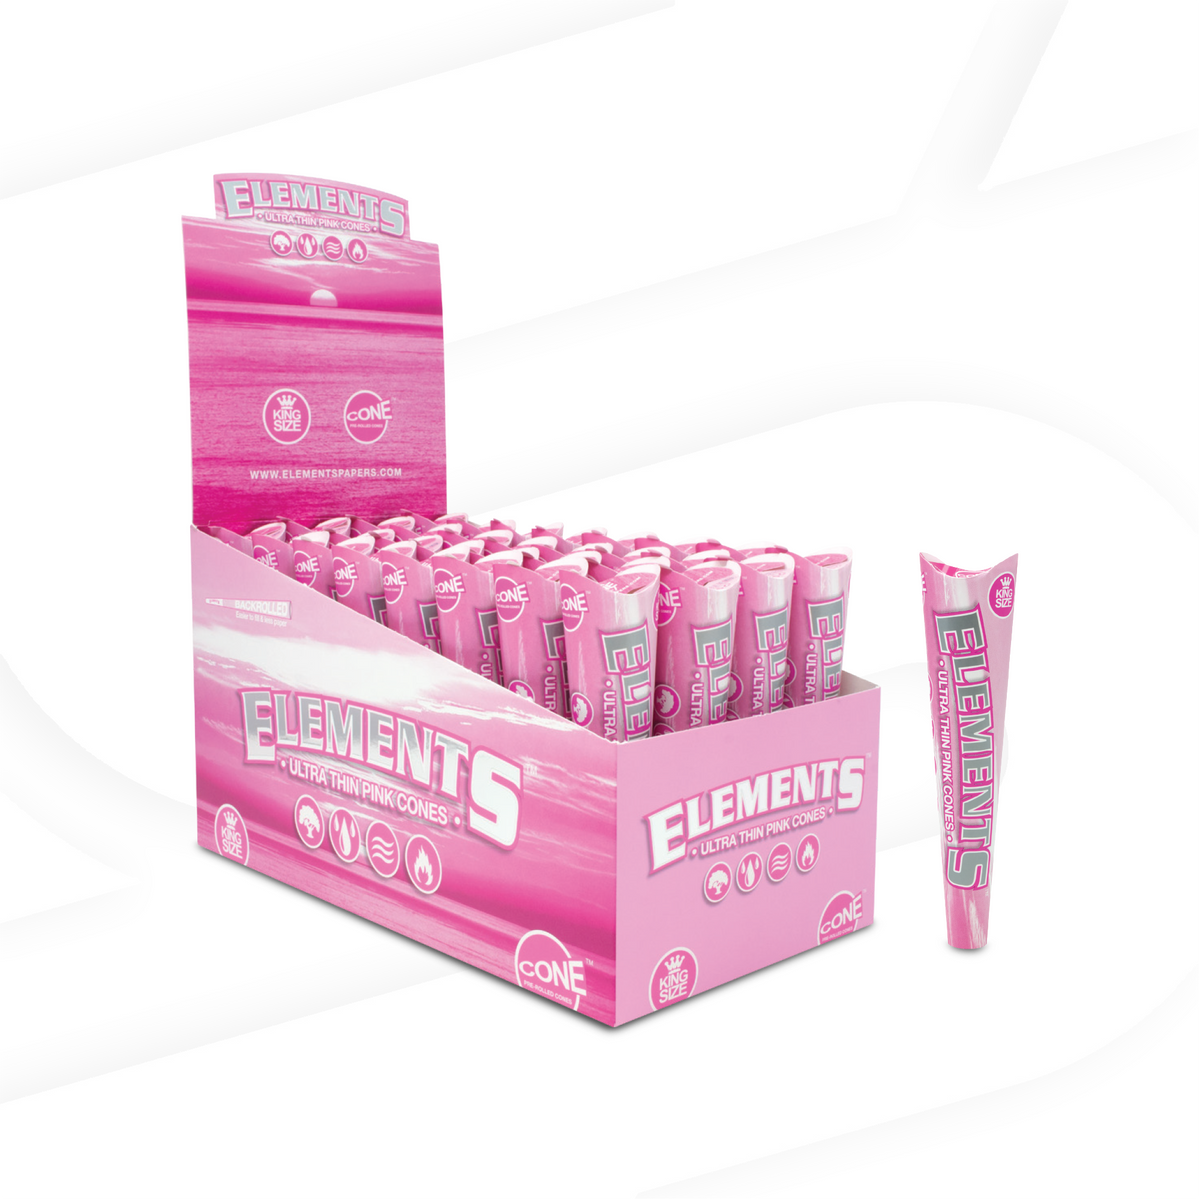 Elements Pink King Size Cones - 3 Pack RAW Cones ELEB-CNPK-KS01_1/32 esd-official